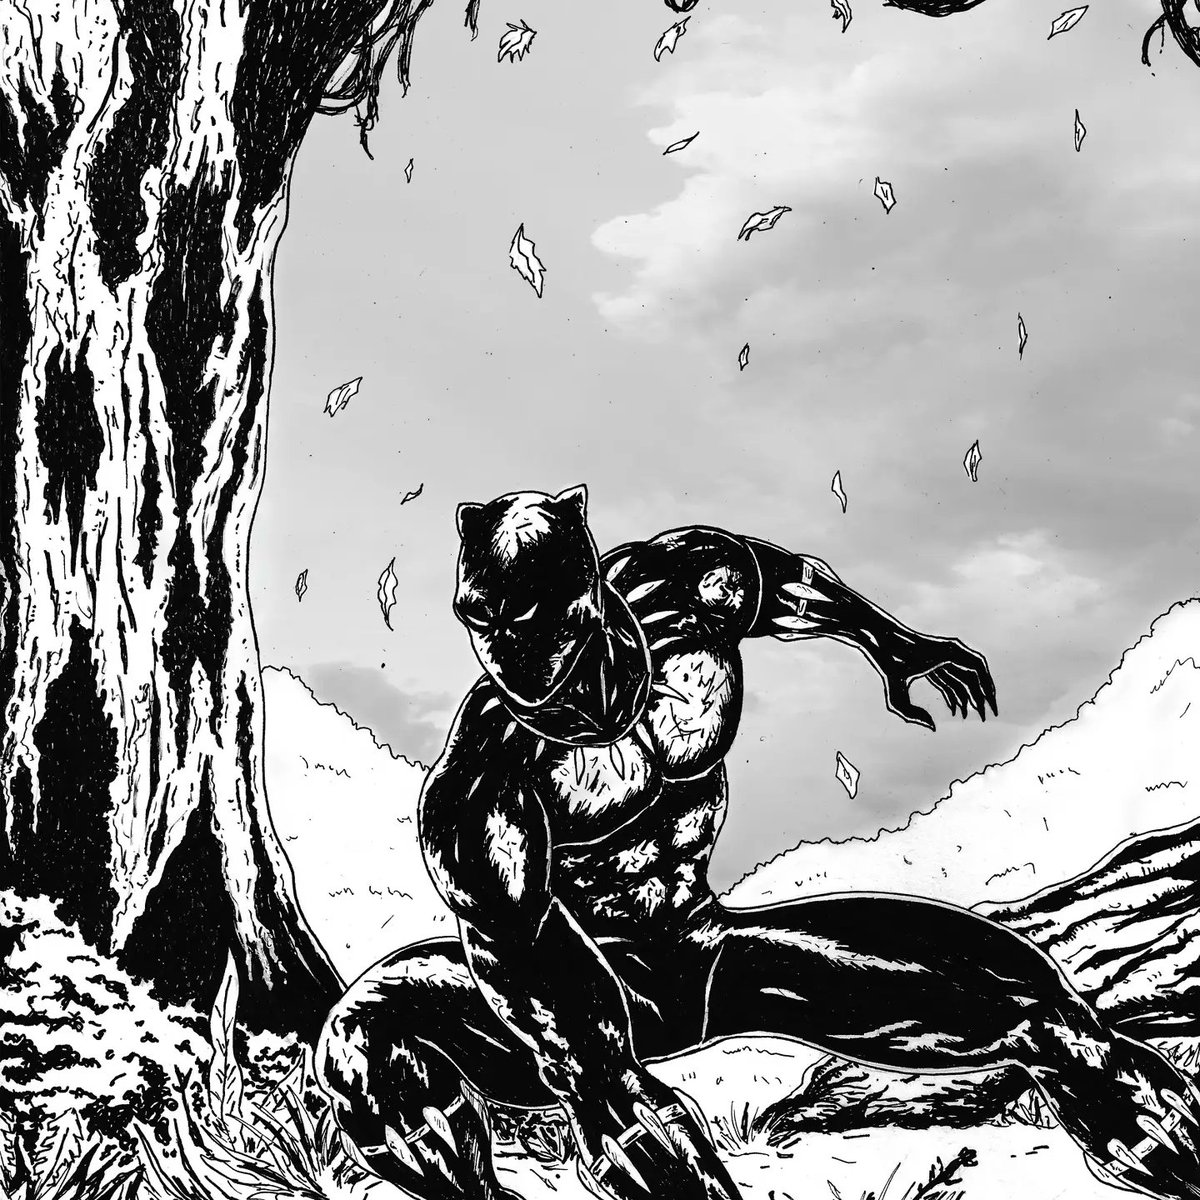 Day 2 of Inktober, today i draw the king of Wakanda, Black Panther. It's been a year since the pass away of Chadwick Boseman, i really missed him, he's the best Black Panther ever.Wakanda Forever! 
#marvel #marvelcomics #avengers #blackpanther #wakanda #kingofwakanda #inktober https://t.co/LNQsI58ESV